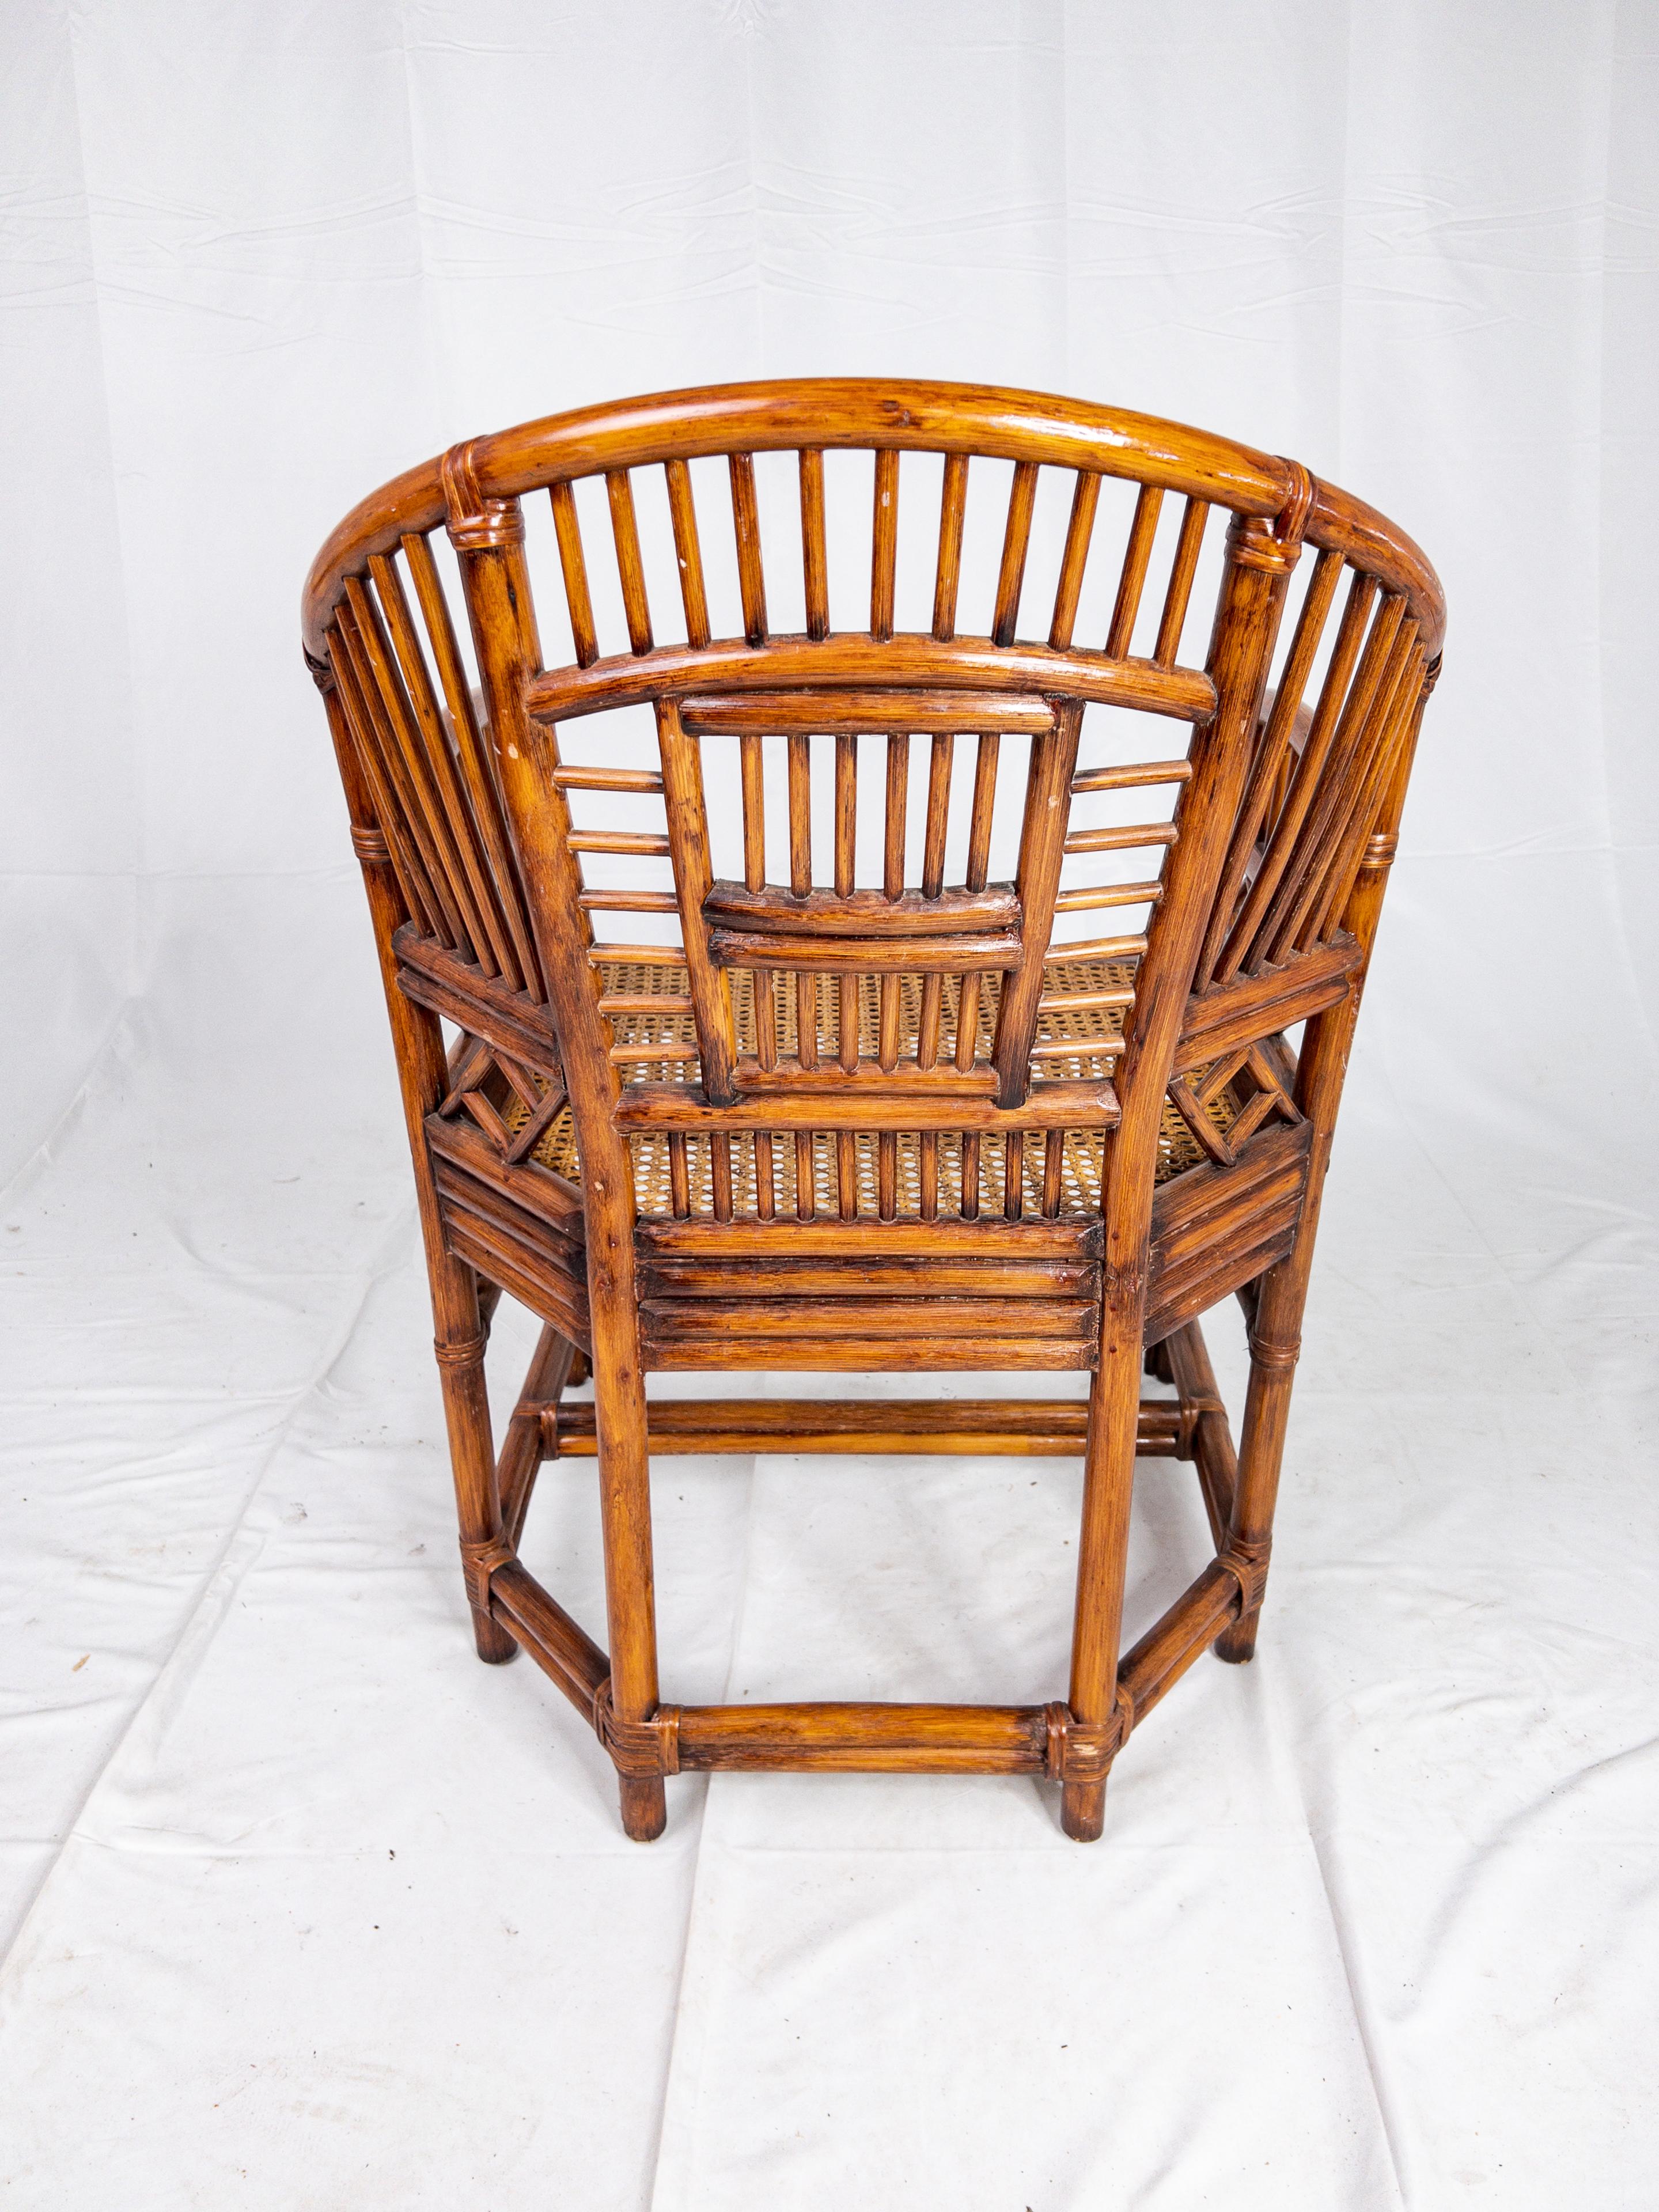 Vintage Brighton Scorched Bamboo Chippendale Chair with Rattan Seats 1